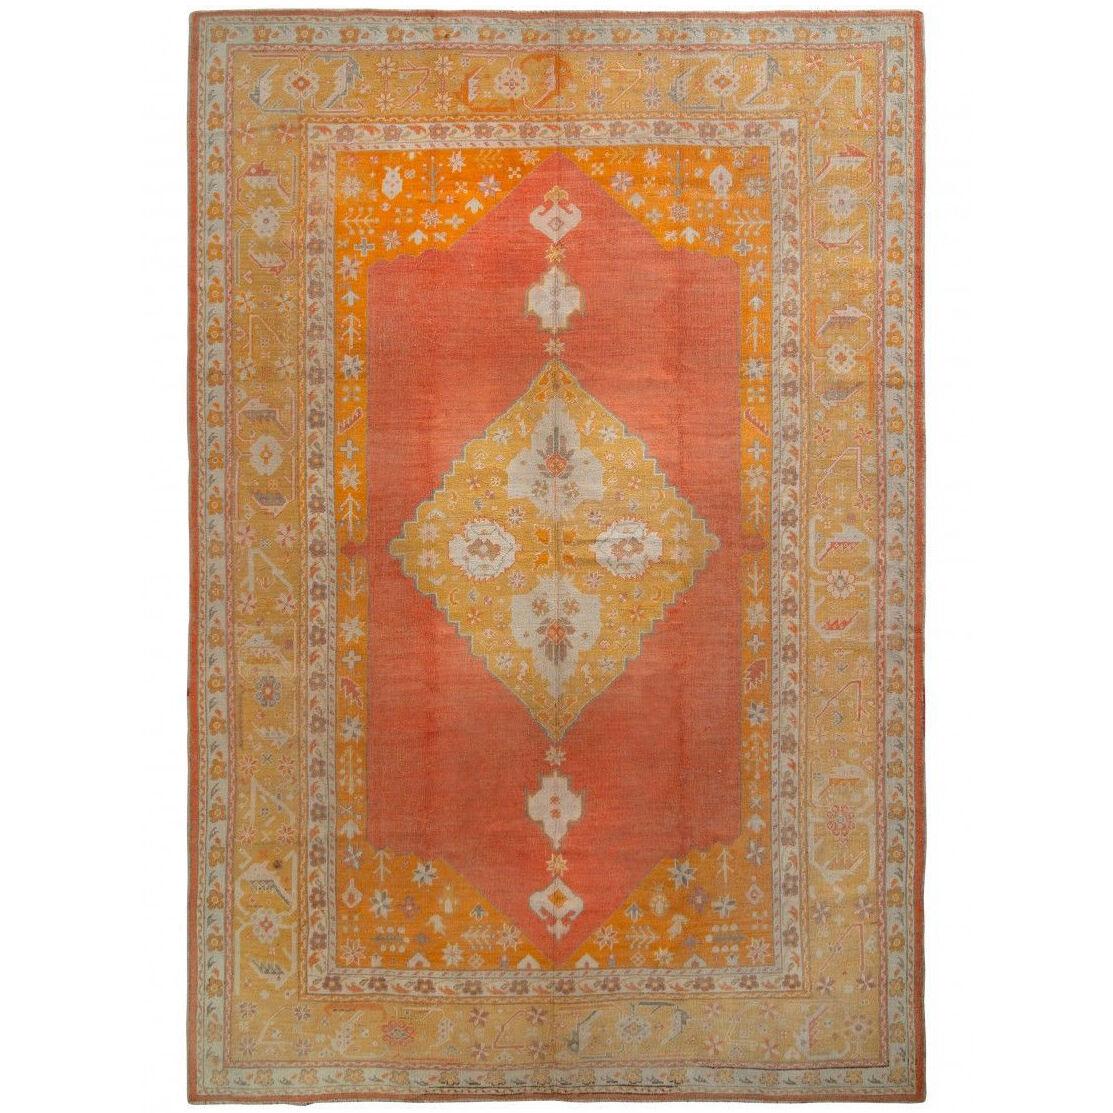 Hand-knotted Antique Oushak Rug in Red and Orange-gold Medallion Pattern